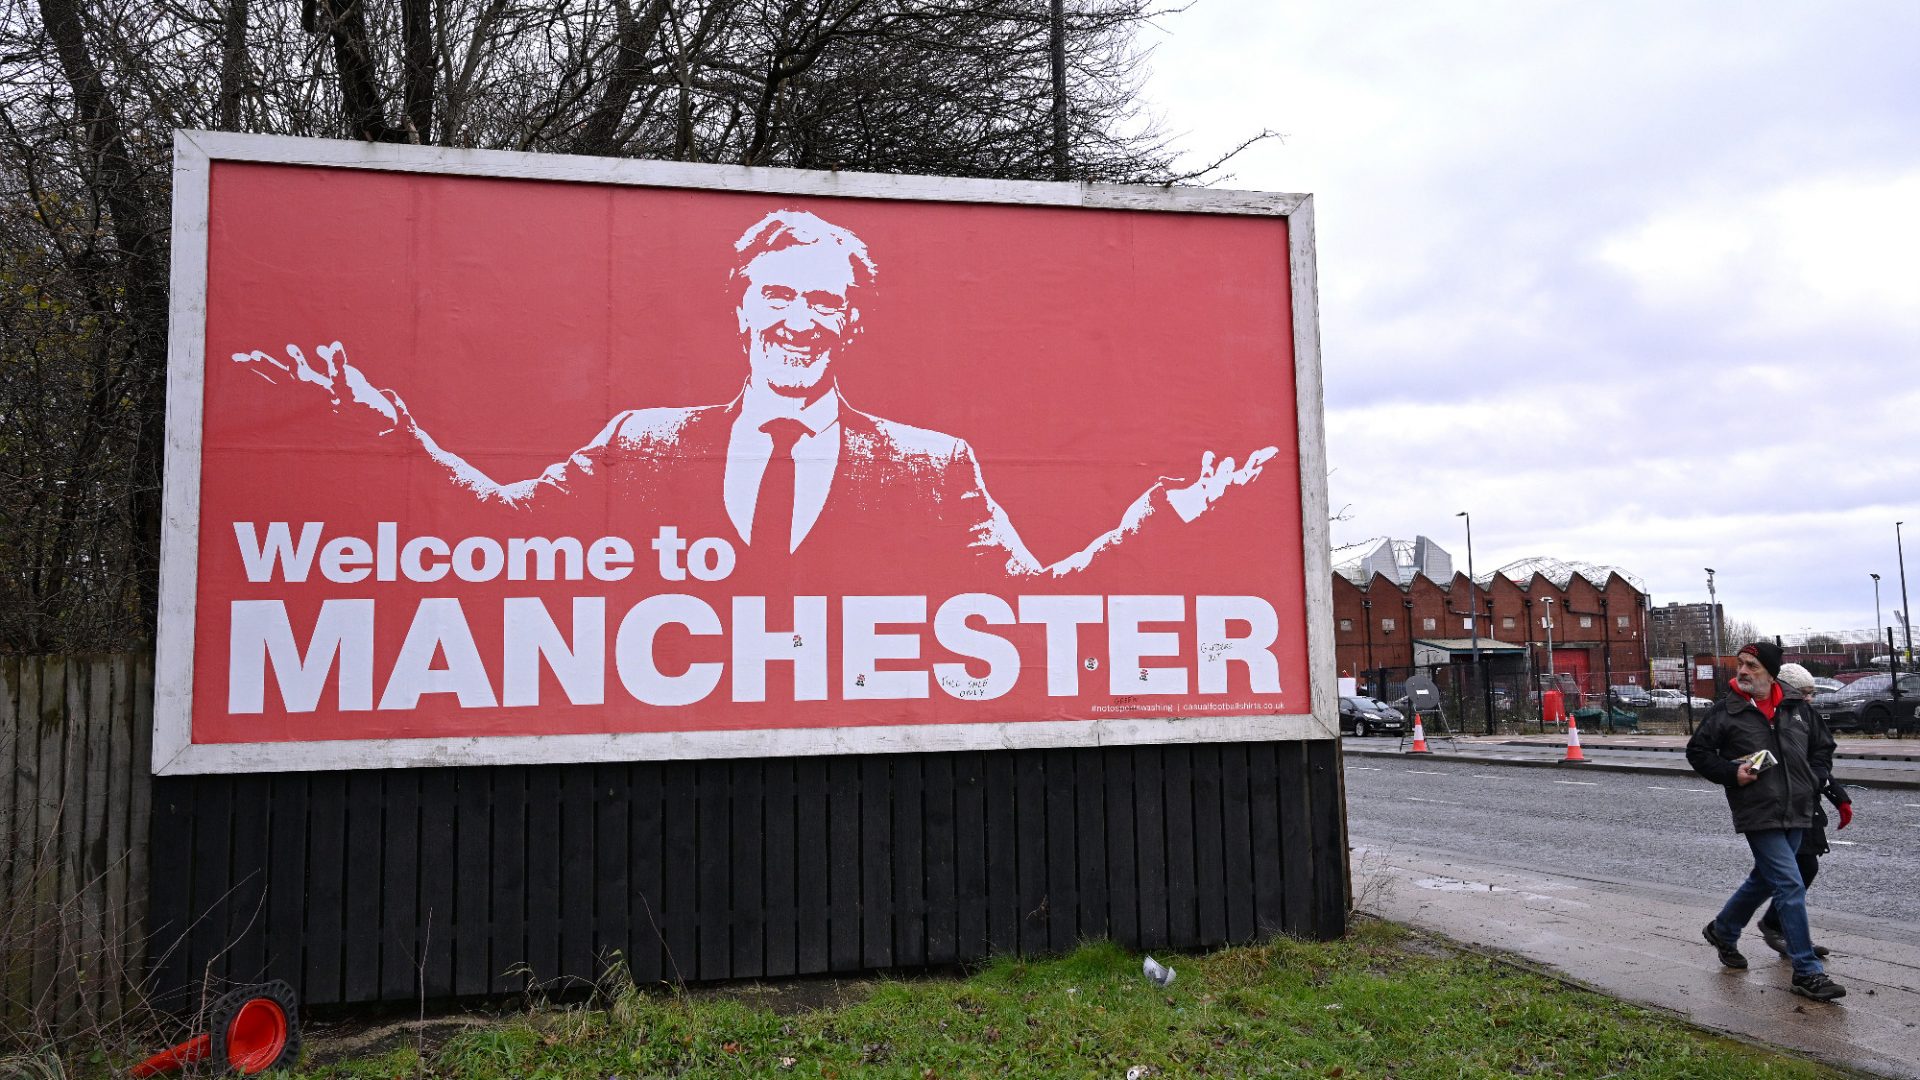 A billboard near Old Trafford, Manchester United’s stadium, boasts an image of the club’s owner, Sir Jim Ratcliffe. Photo: Stu Forster/Getty